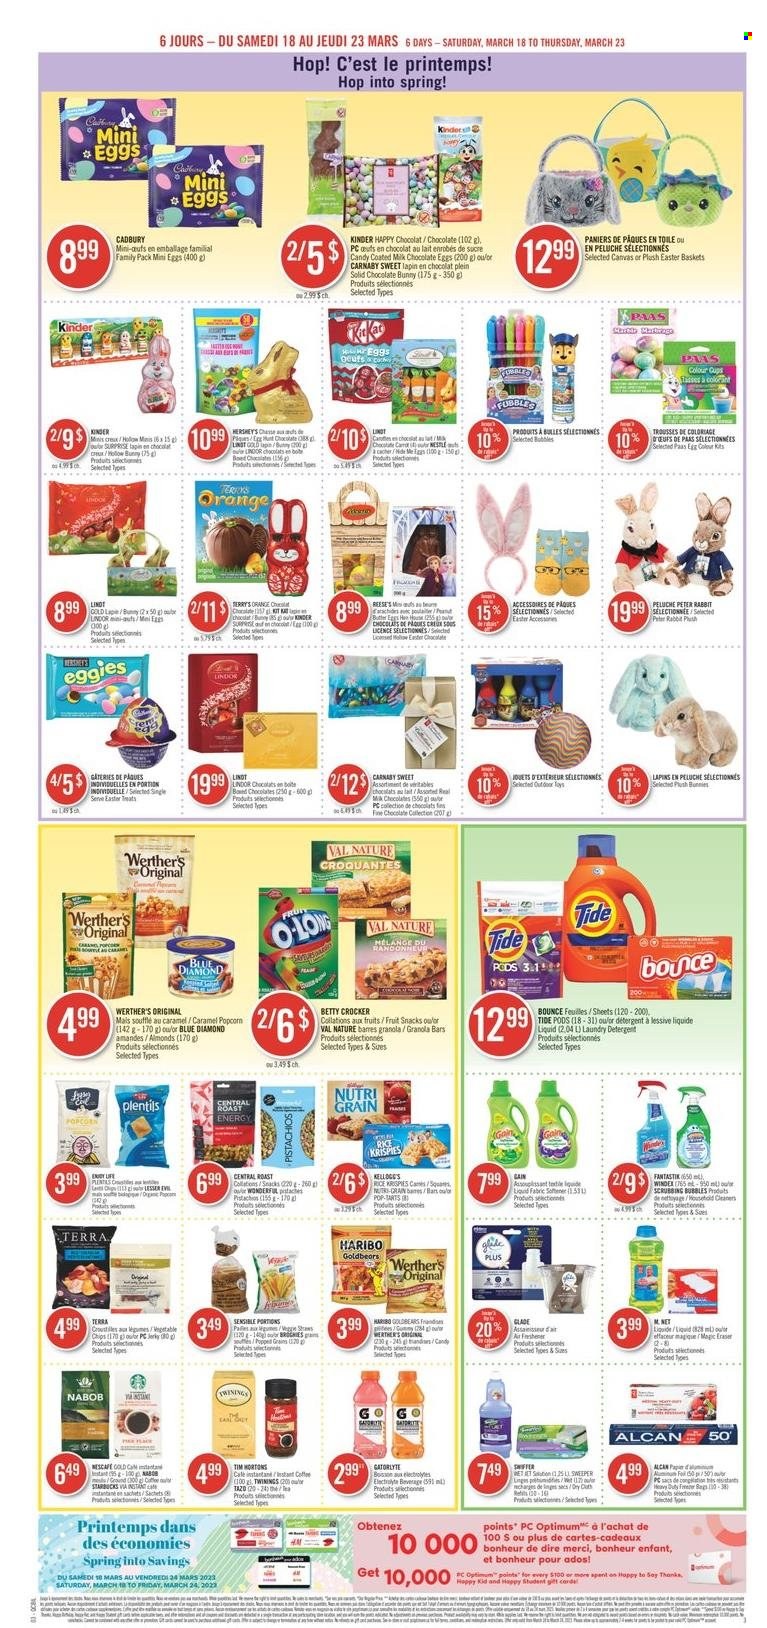 thumbnail - Pharmaprix Flyer - March 18, 2023 - March 23, 2023 - Sales products - oranges, roast, Reese's, Hershey's, milk chocolate, chocolate, Haribo, Mars, Cadbury, Merci, chocolate egg, chocolate bunny, fruit snack, chips, popcorn, vegetable chips, granola bar, Rice Krispies, Nutri-Grain, honey, almonds, pistachios, Blue Diamond, Twinings, coffee, instant coffee, Starbucks, Gain, Scrubbing Bubbles, Swiffer, Tide, fabric softener, laundry detergent, Bounce, basket, cup, straw, aluminium foil, pen, eraser, canvas, air freshener, Glade, Optimum, toys, outdoor toy, detergent, Lindor, Nescafé. Page 5.